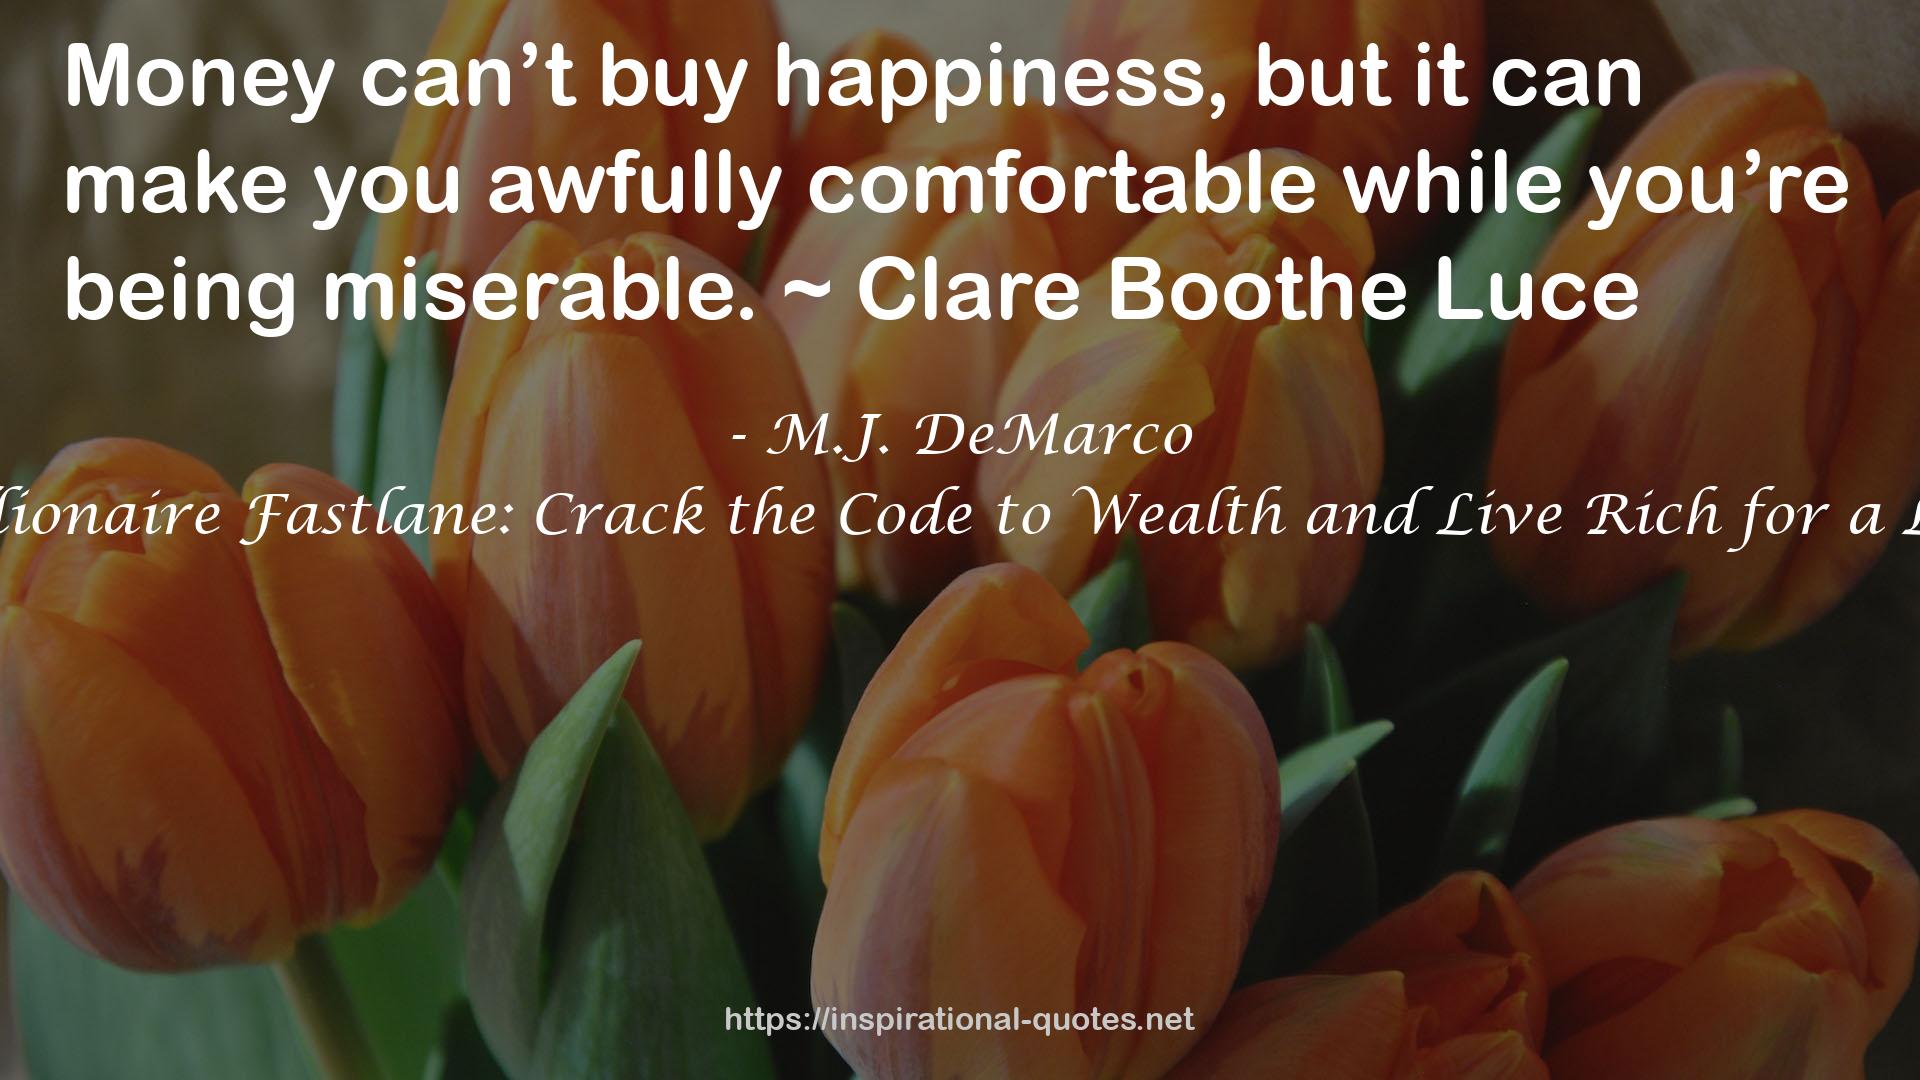 The Millionaire Fastlane: Crack the Code to Wealth and Live Rich for a Lifetime! QUOTES